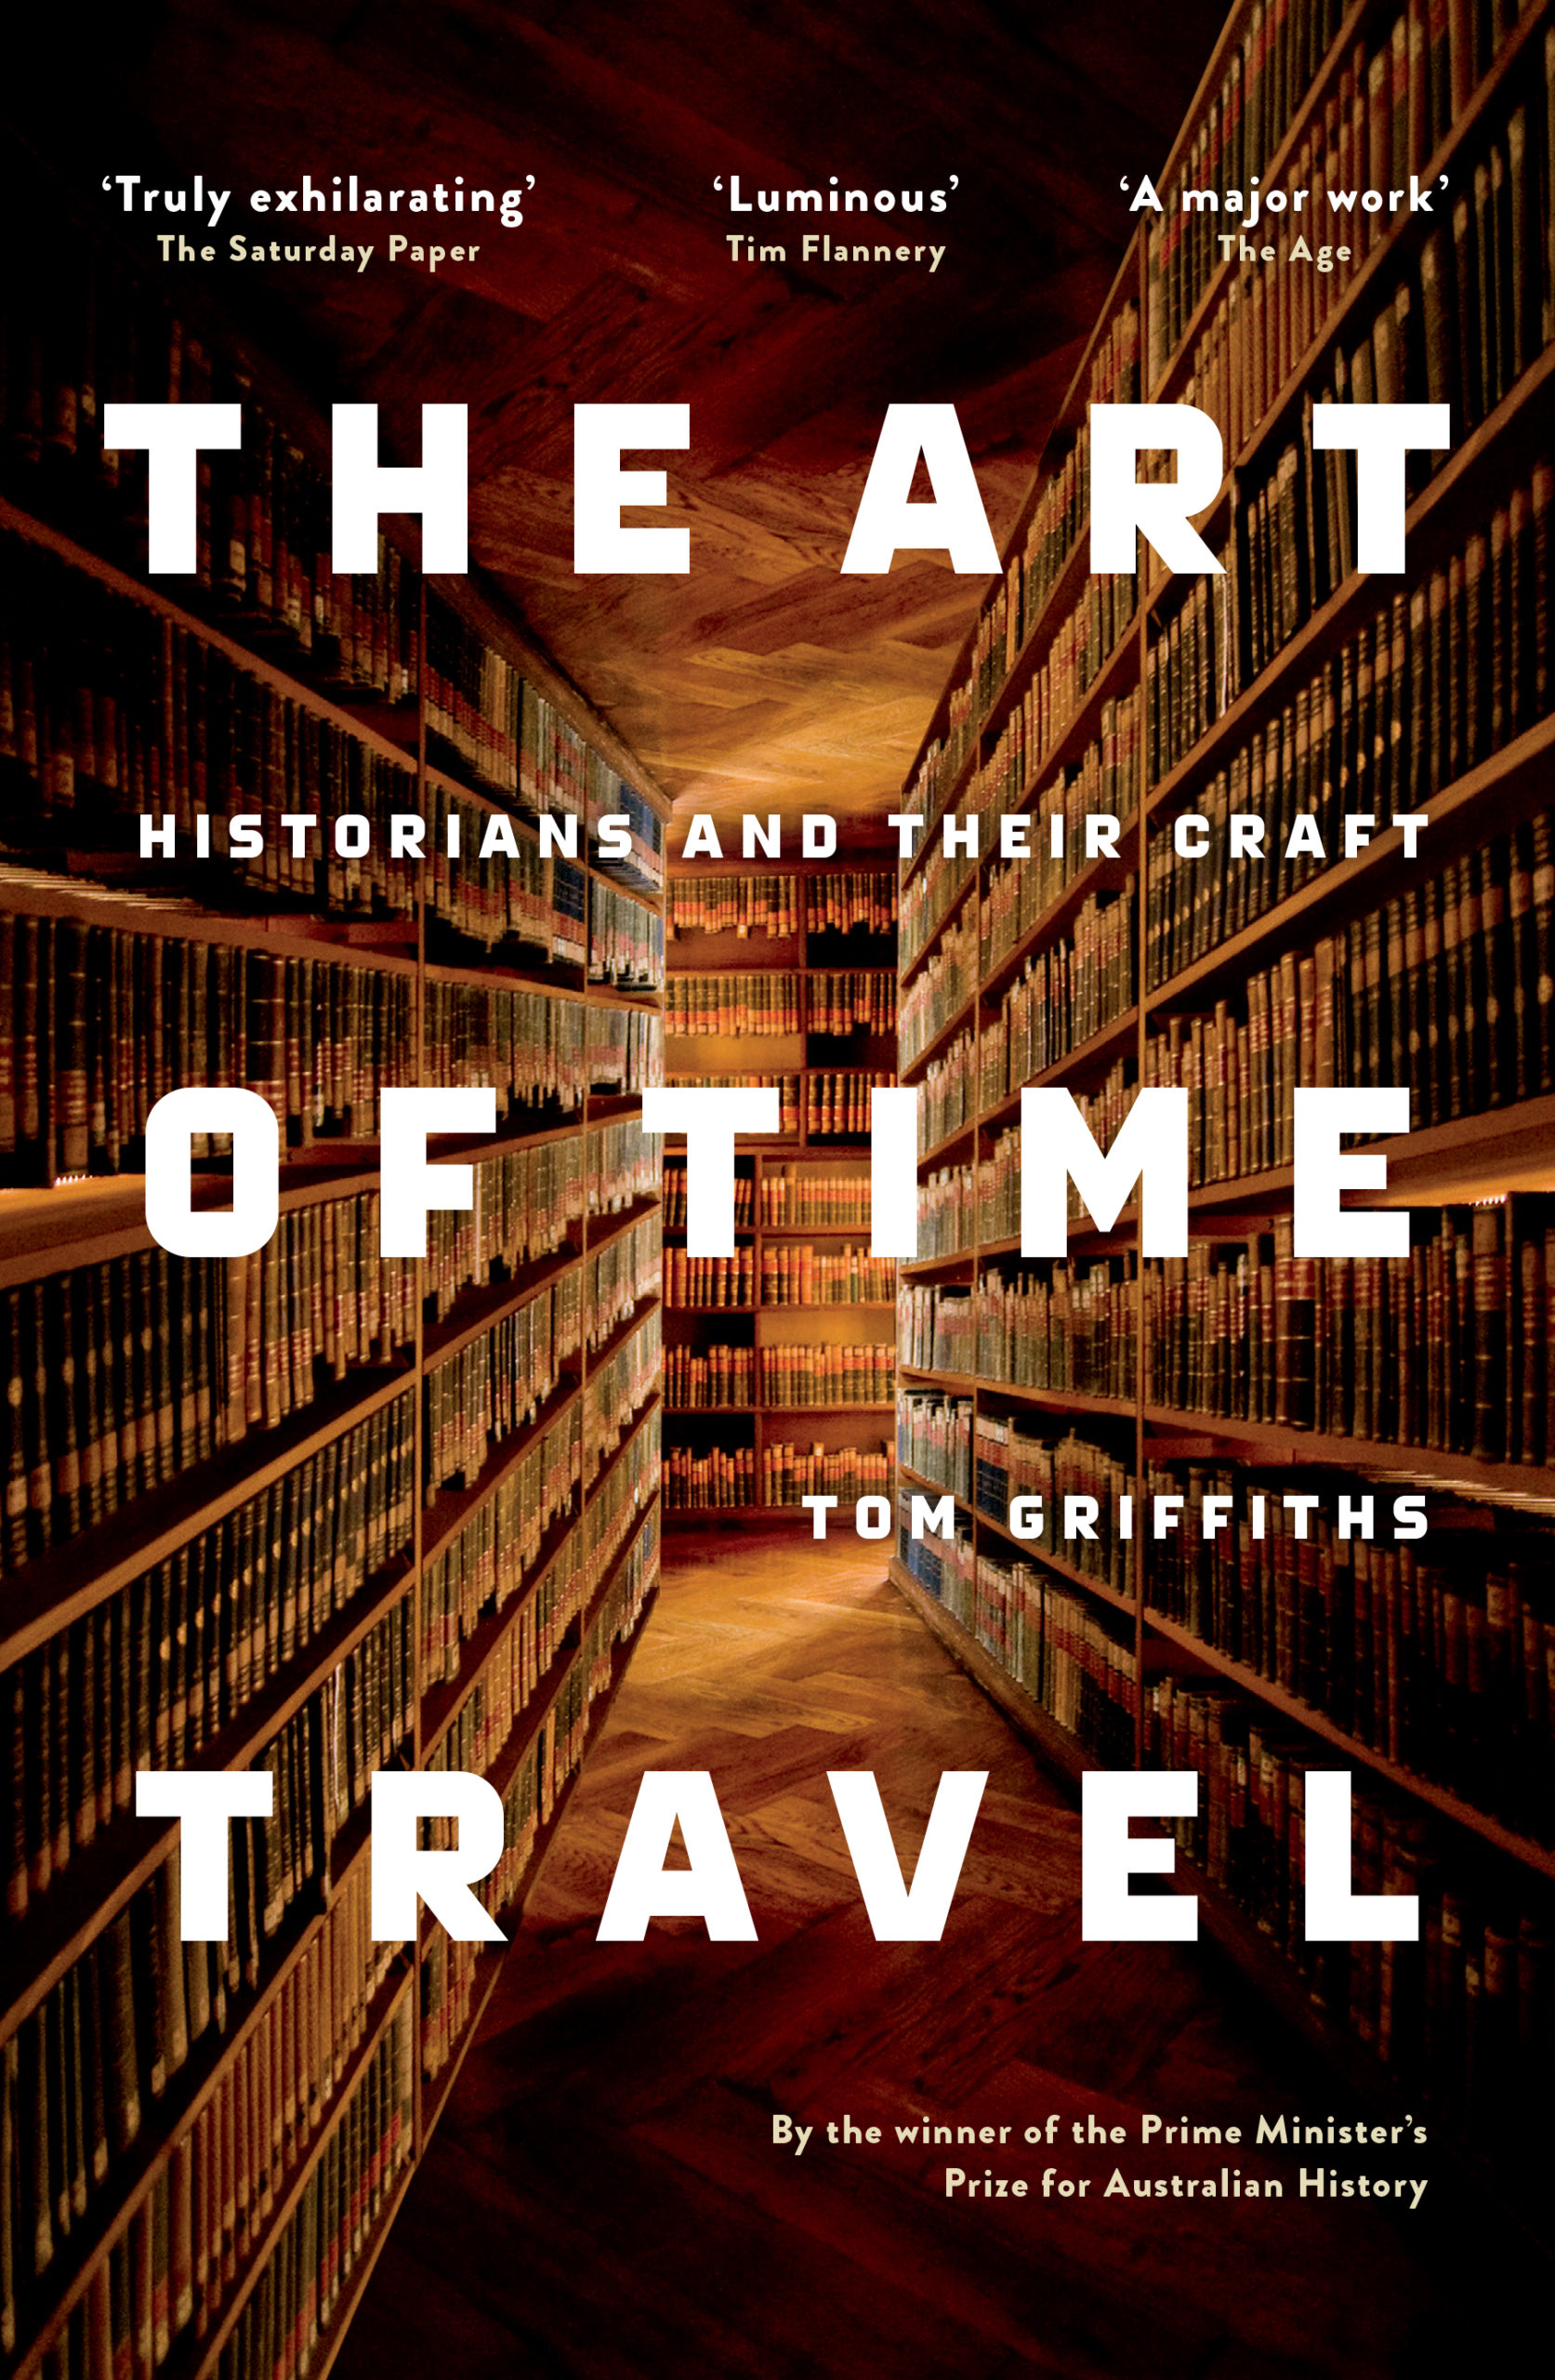 Time　by　of　Historians　The　Their　of　Society　Historical　Art　Griffiths　Royal　Tom　Travel:　Craft　and　Victoria